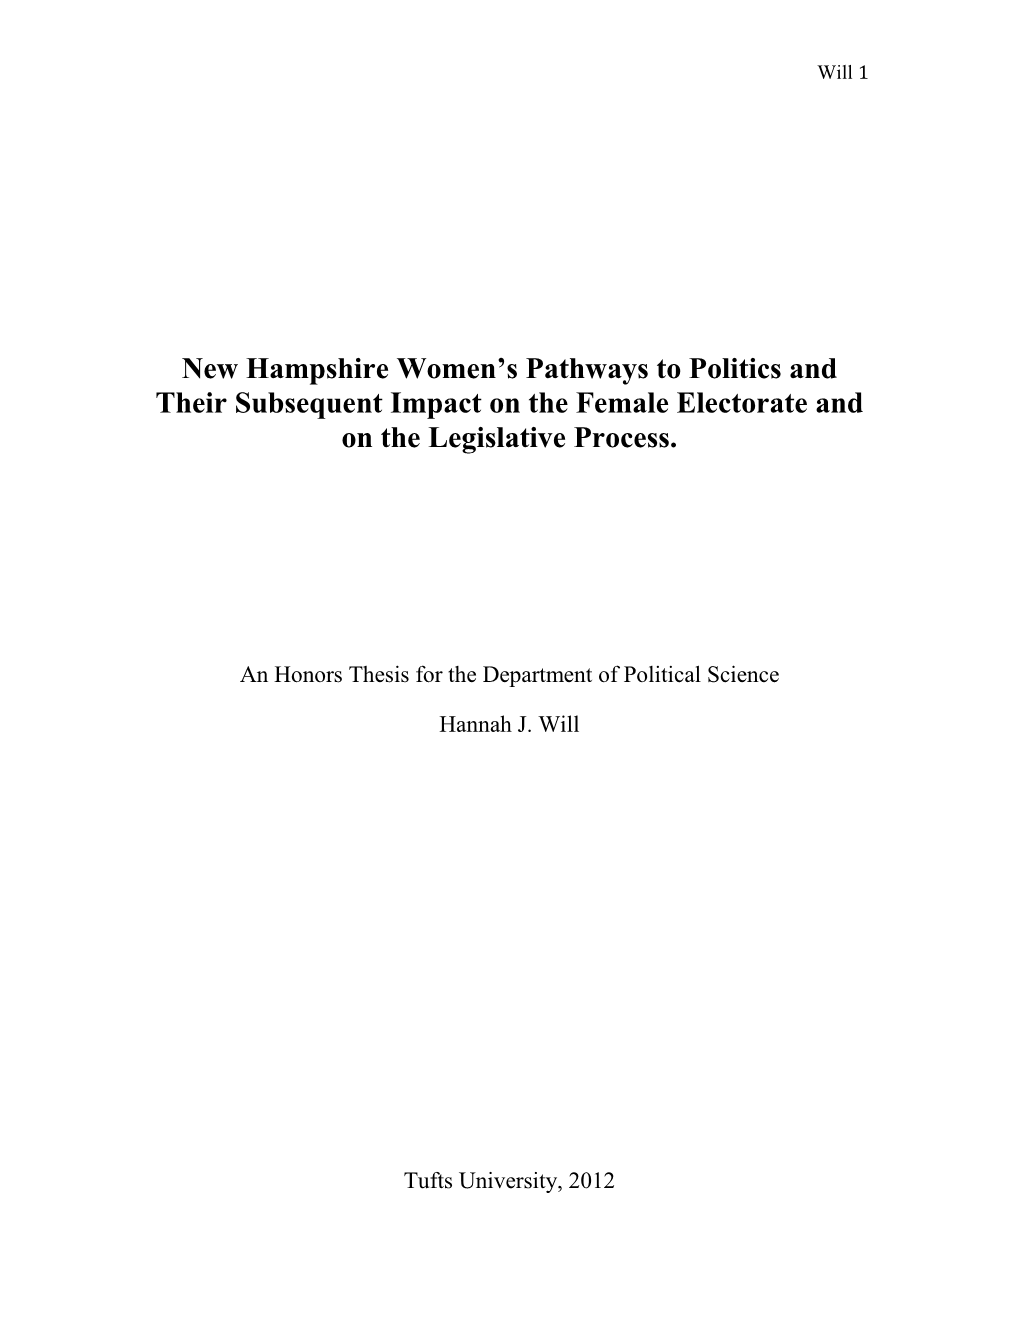 New Hampshire Women's Pathways to Politics and Their Subsequent Impact on the Female Electorate and on the Legislative Process